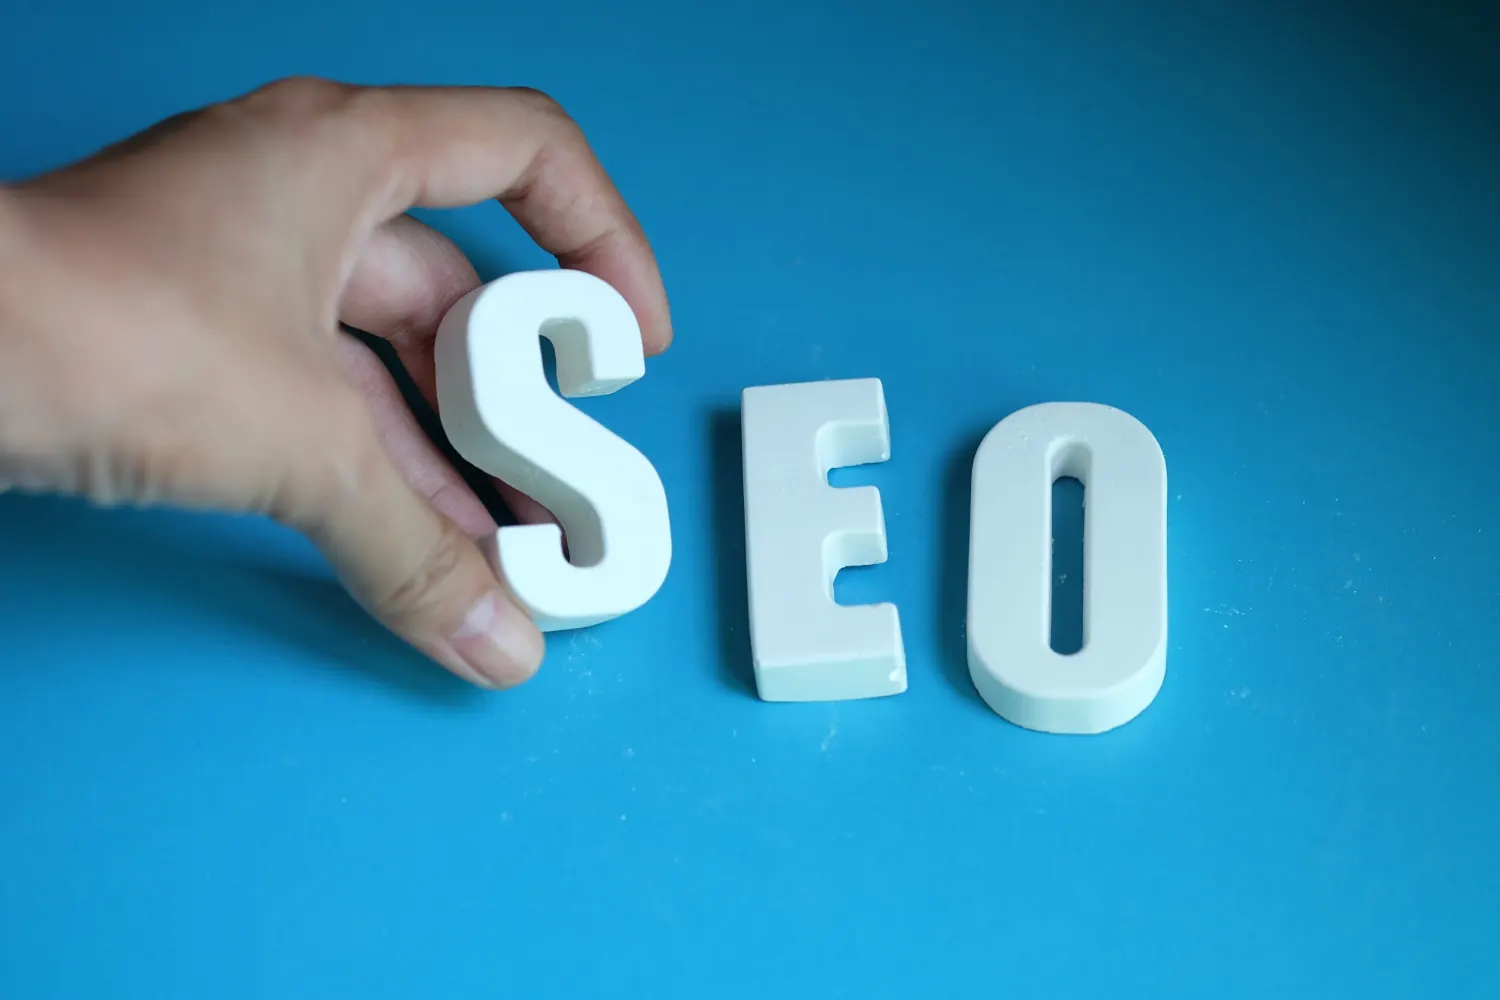 How does SEO help every business?